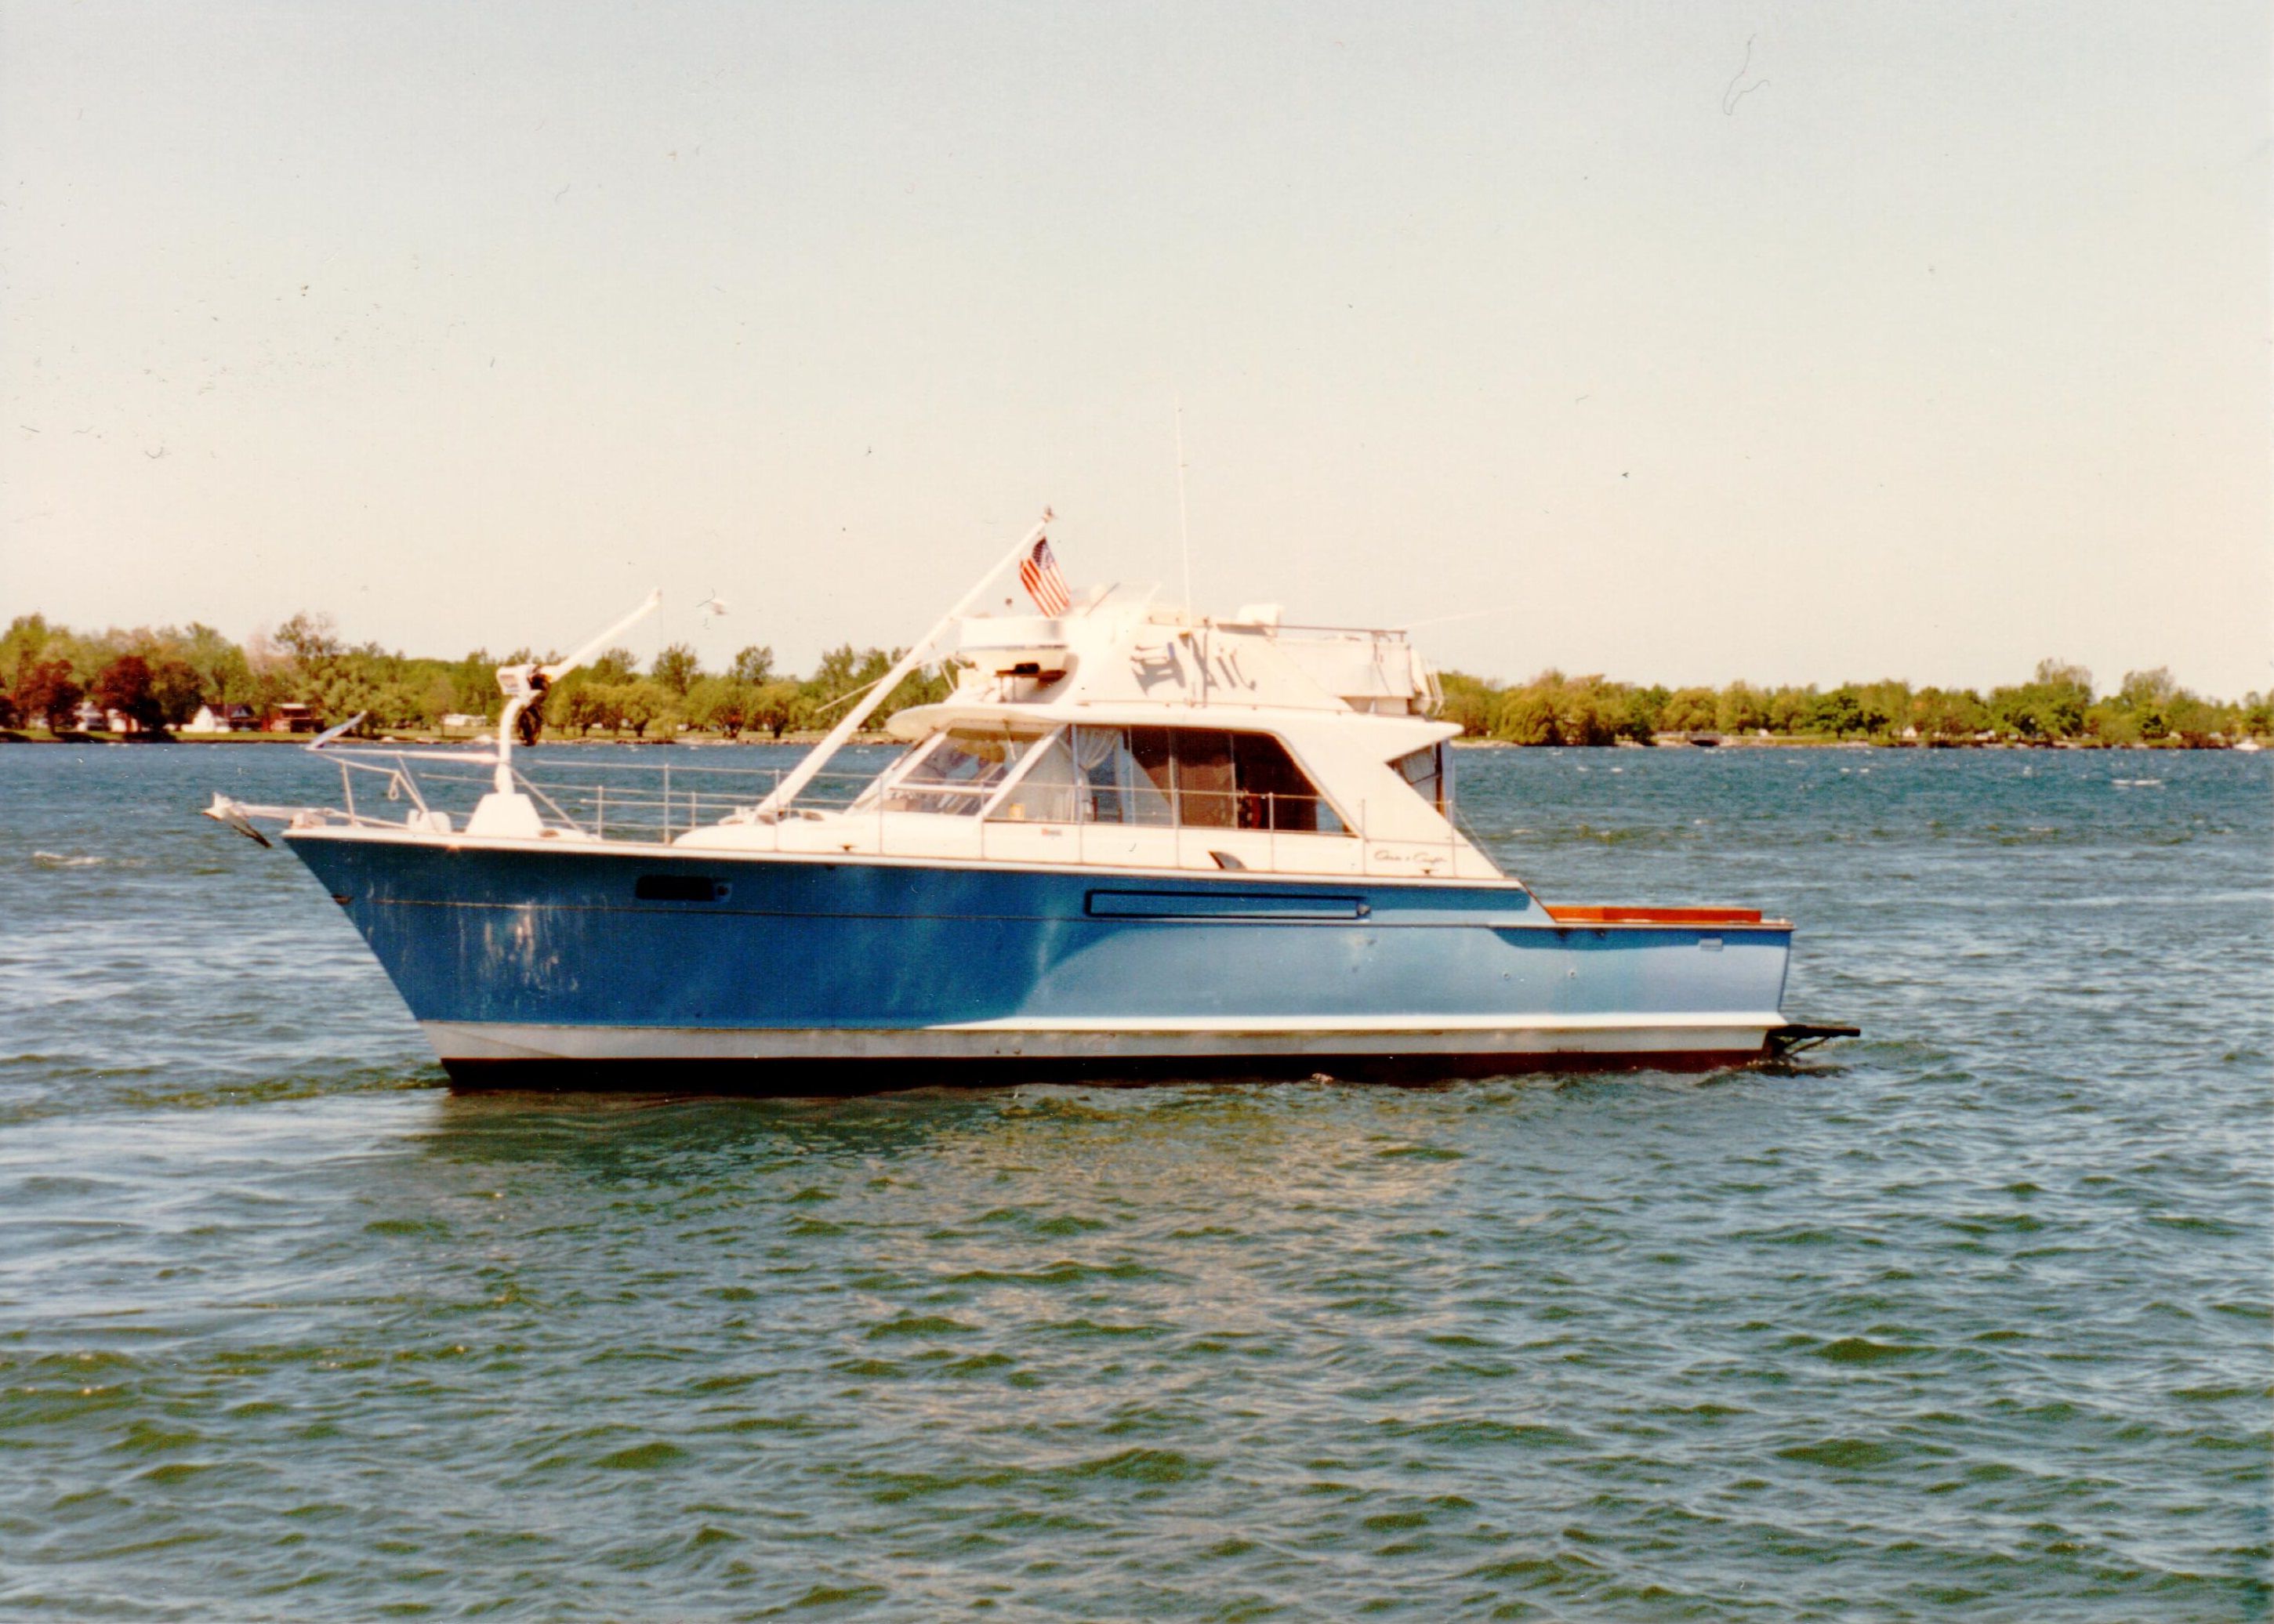 A photo of a blue and white boat facing left in the water.